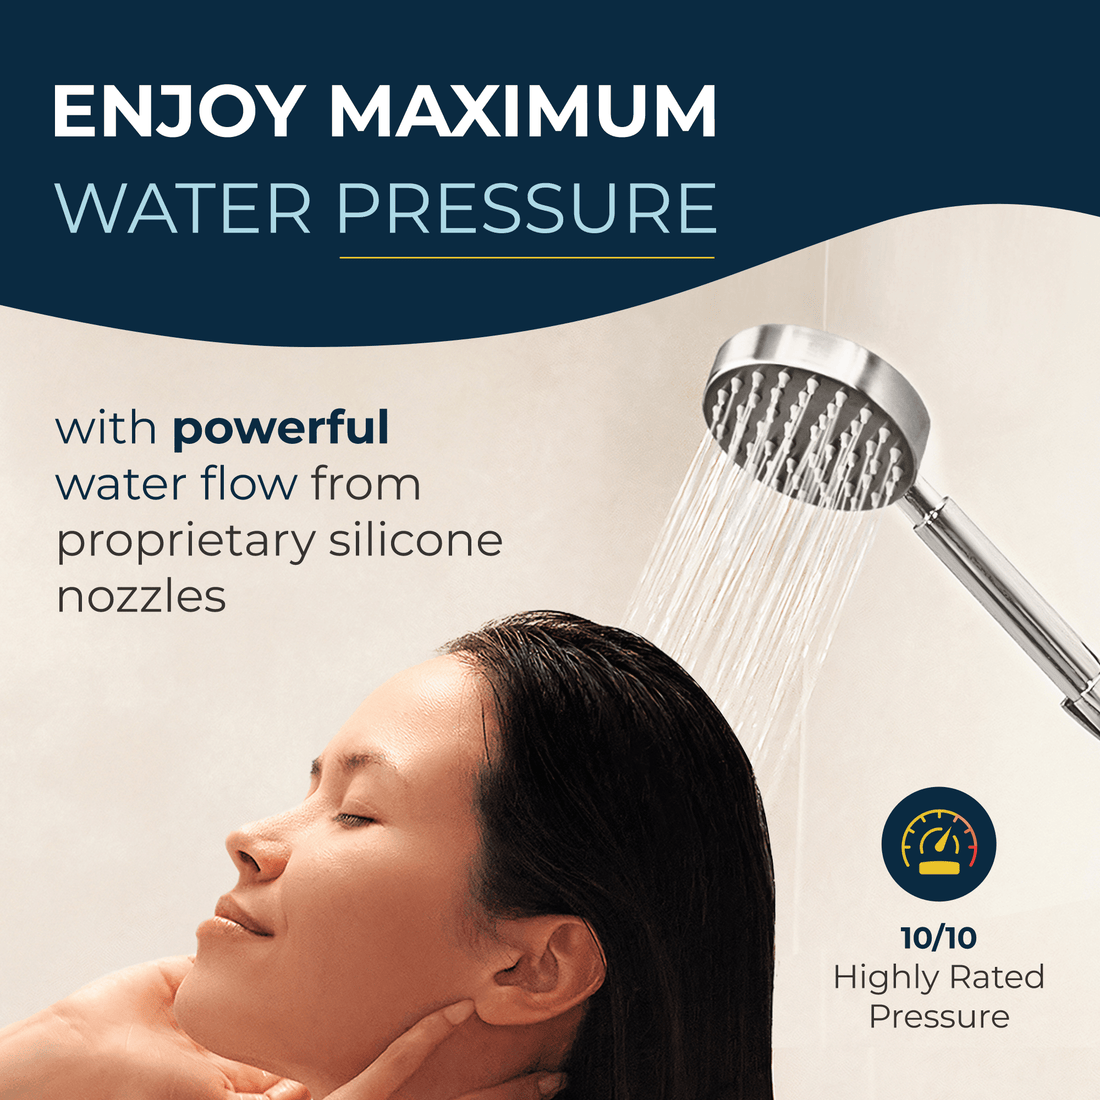 Maximum Water Pressure All Metal Handheld Shower Head Set - Complete Shower System with Valve and Trim Chrome2.5